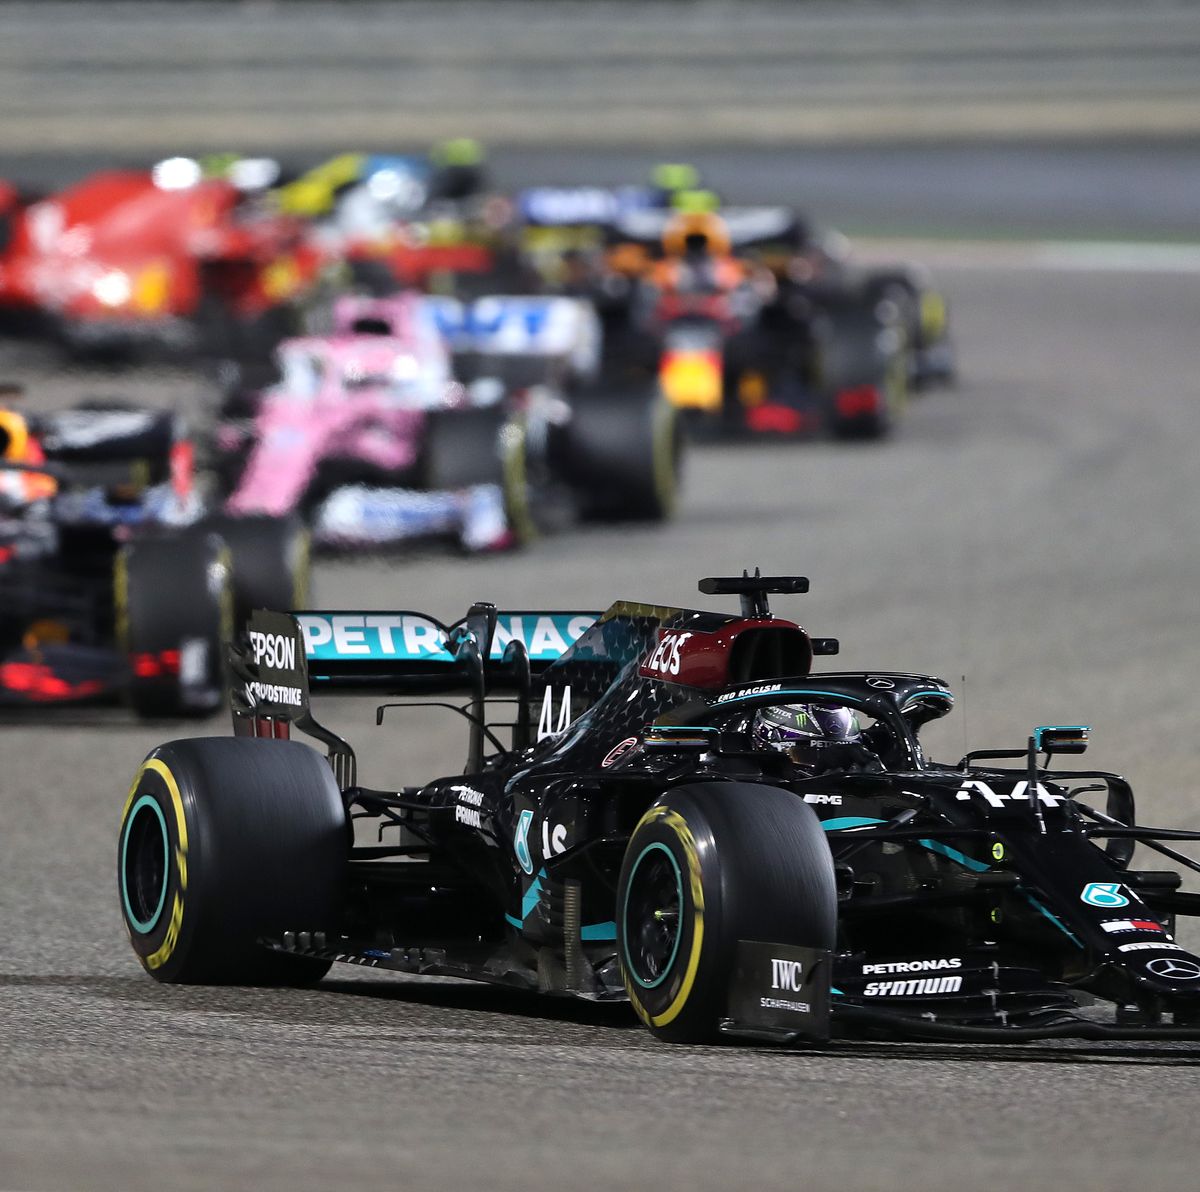 With Expenses Restricted, Mercedes' F1 Profits Rise